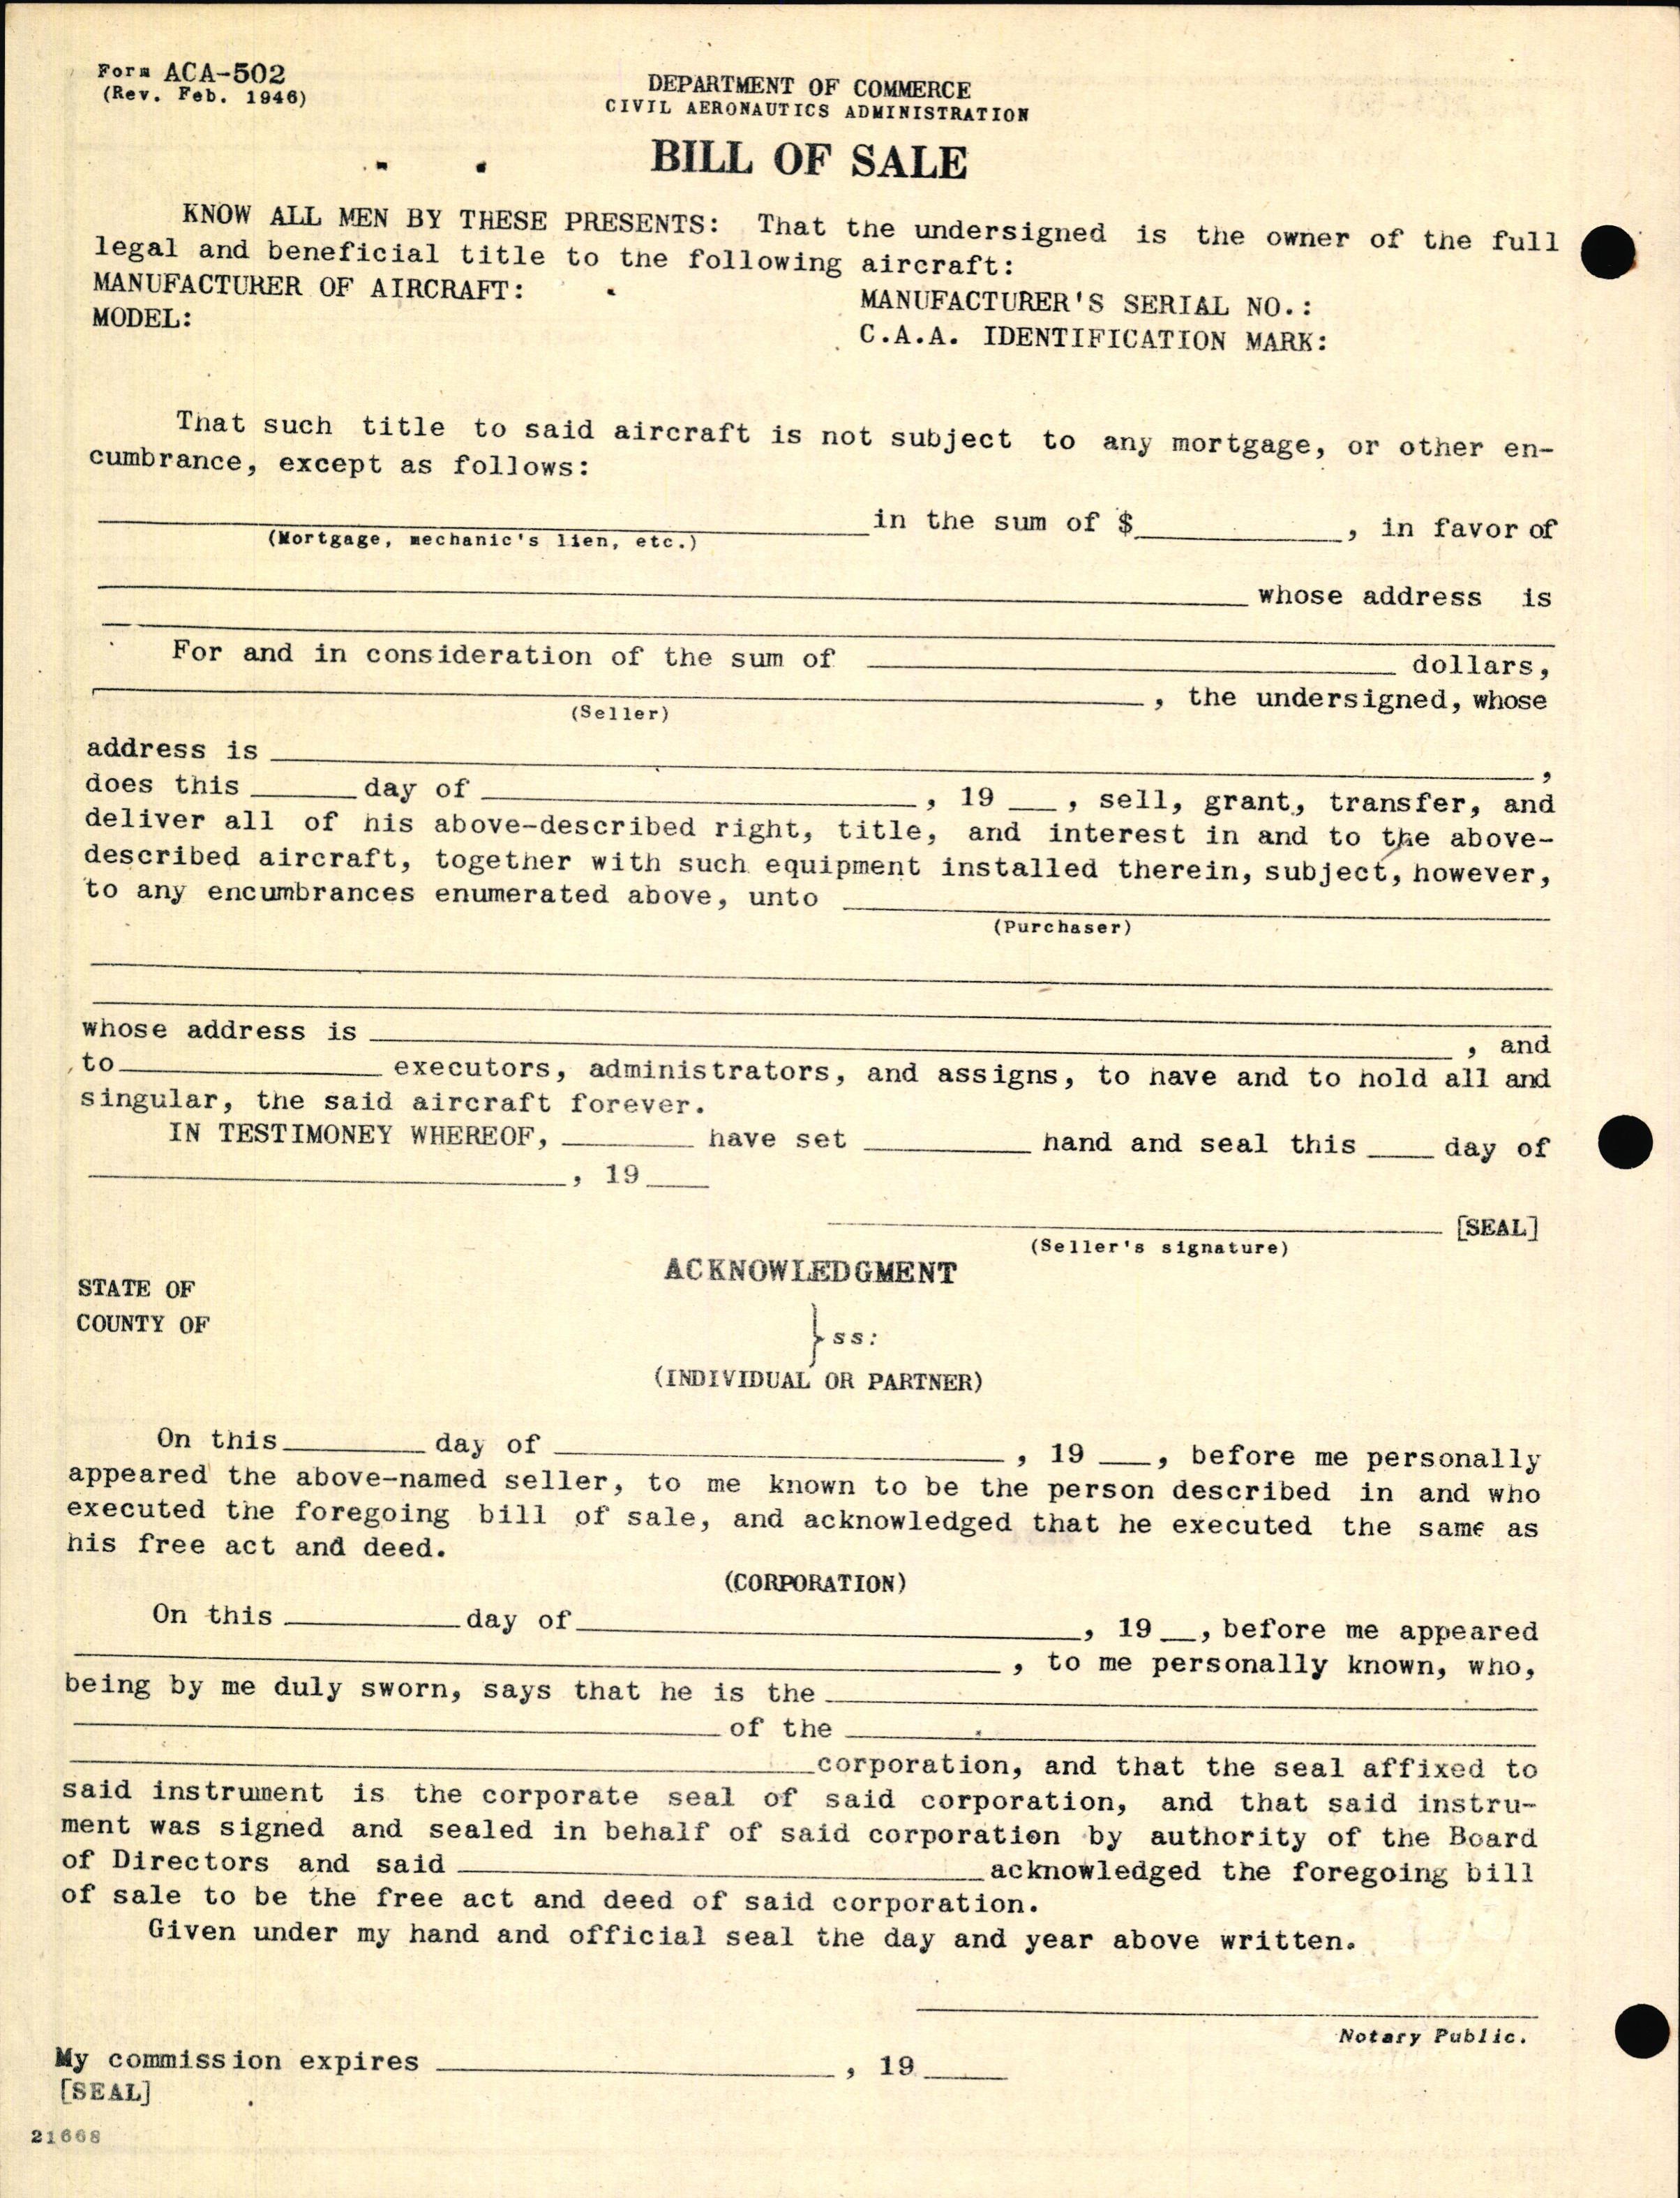 Sample page 2 from AirCorps Library document: Technical Information for Serial Number 2129